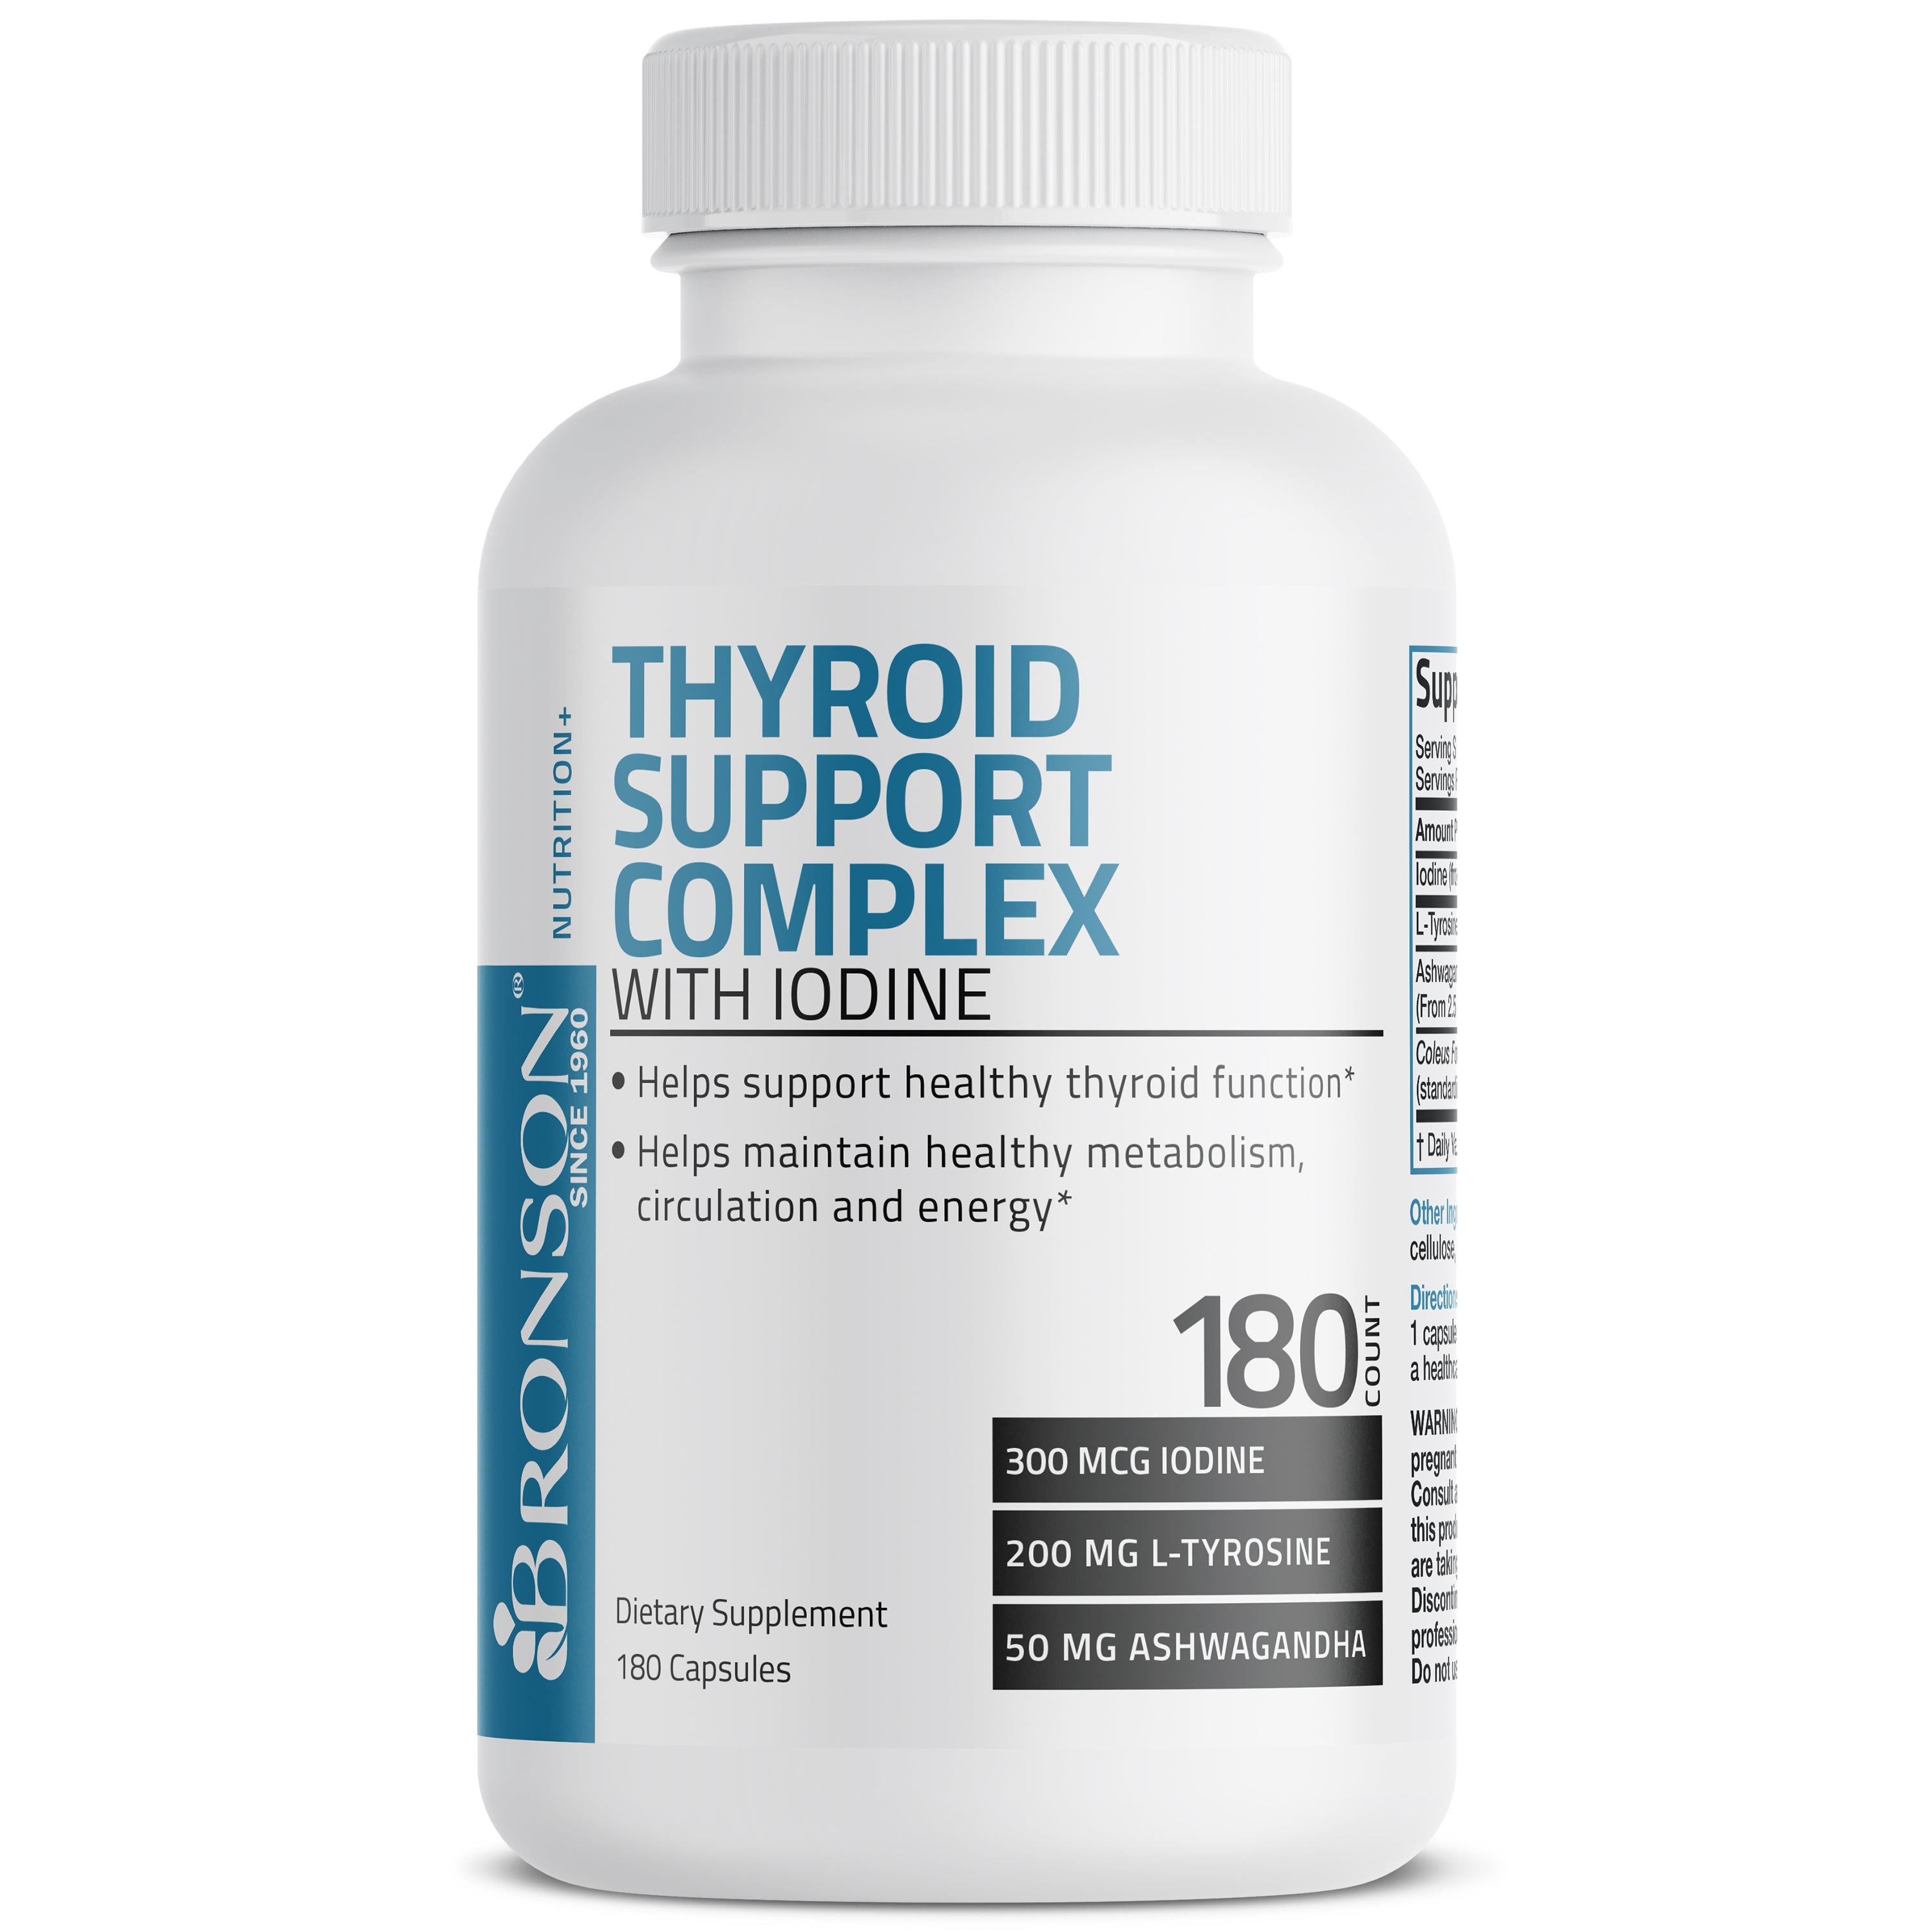 Thyroid-SP Complex - 180 Capsules view 3 of 6